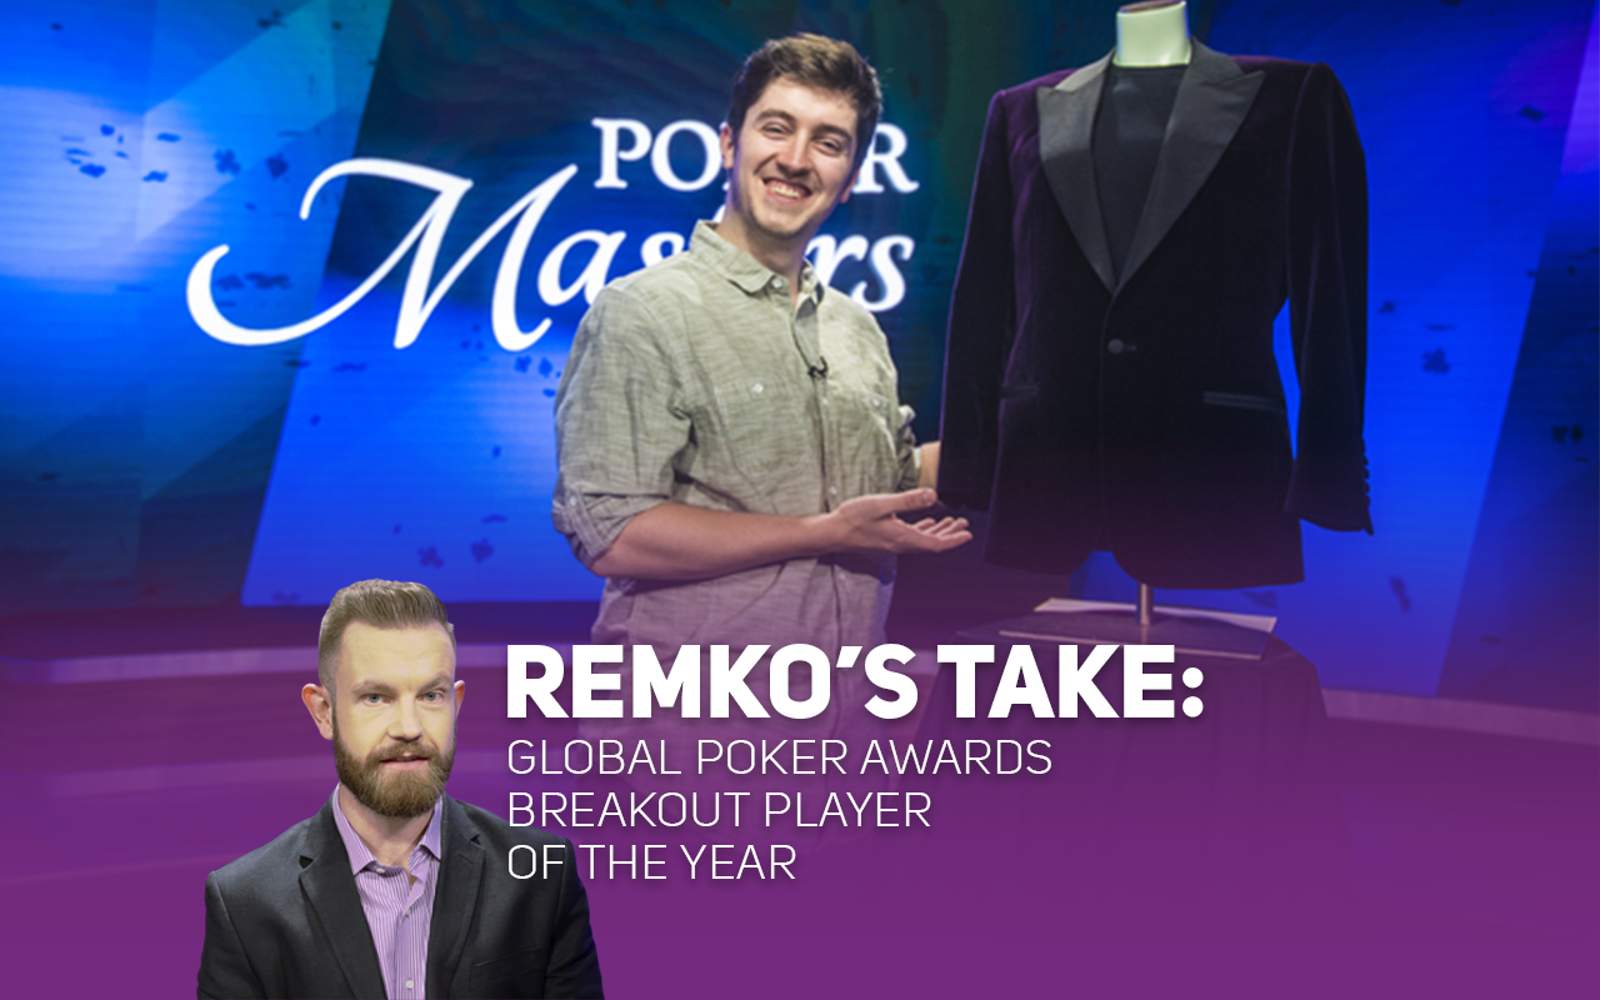 Remko's Take: Global Poker Awards Breakout Player of the Year